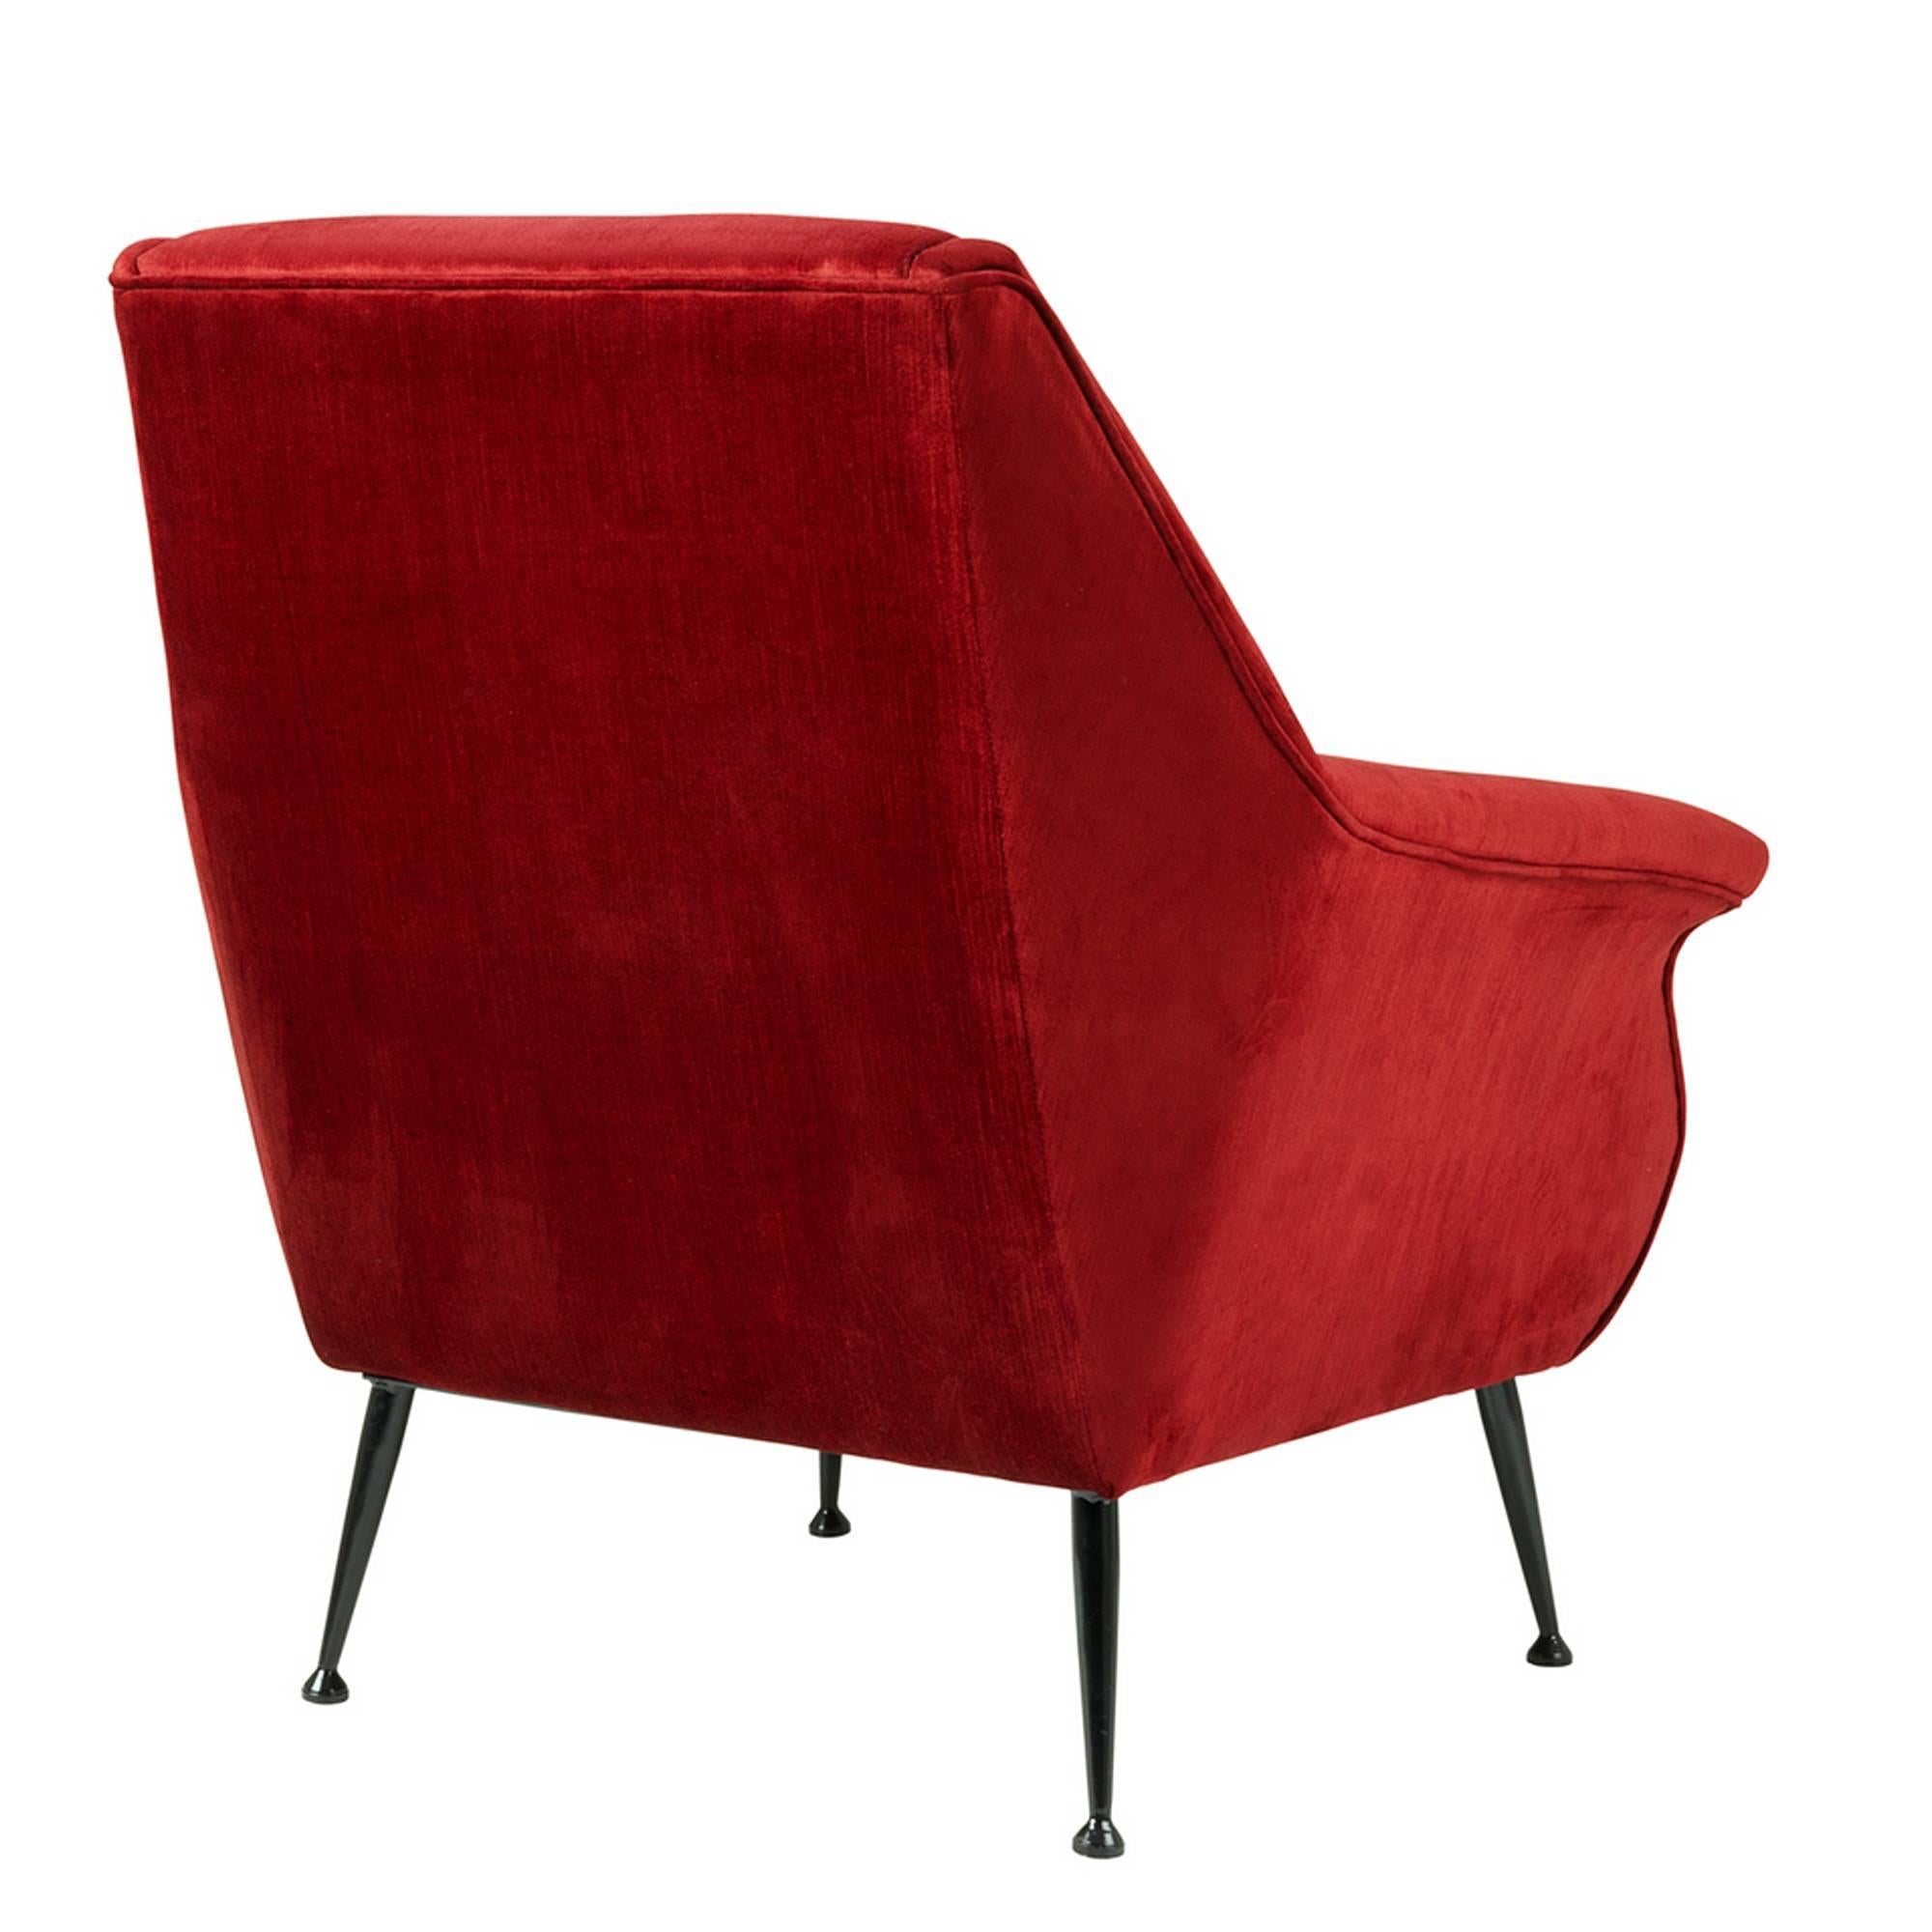 Chinese Red Lounge Chair with Red Essex Fabric and Bronze Legs